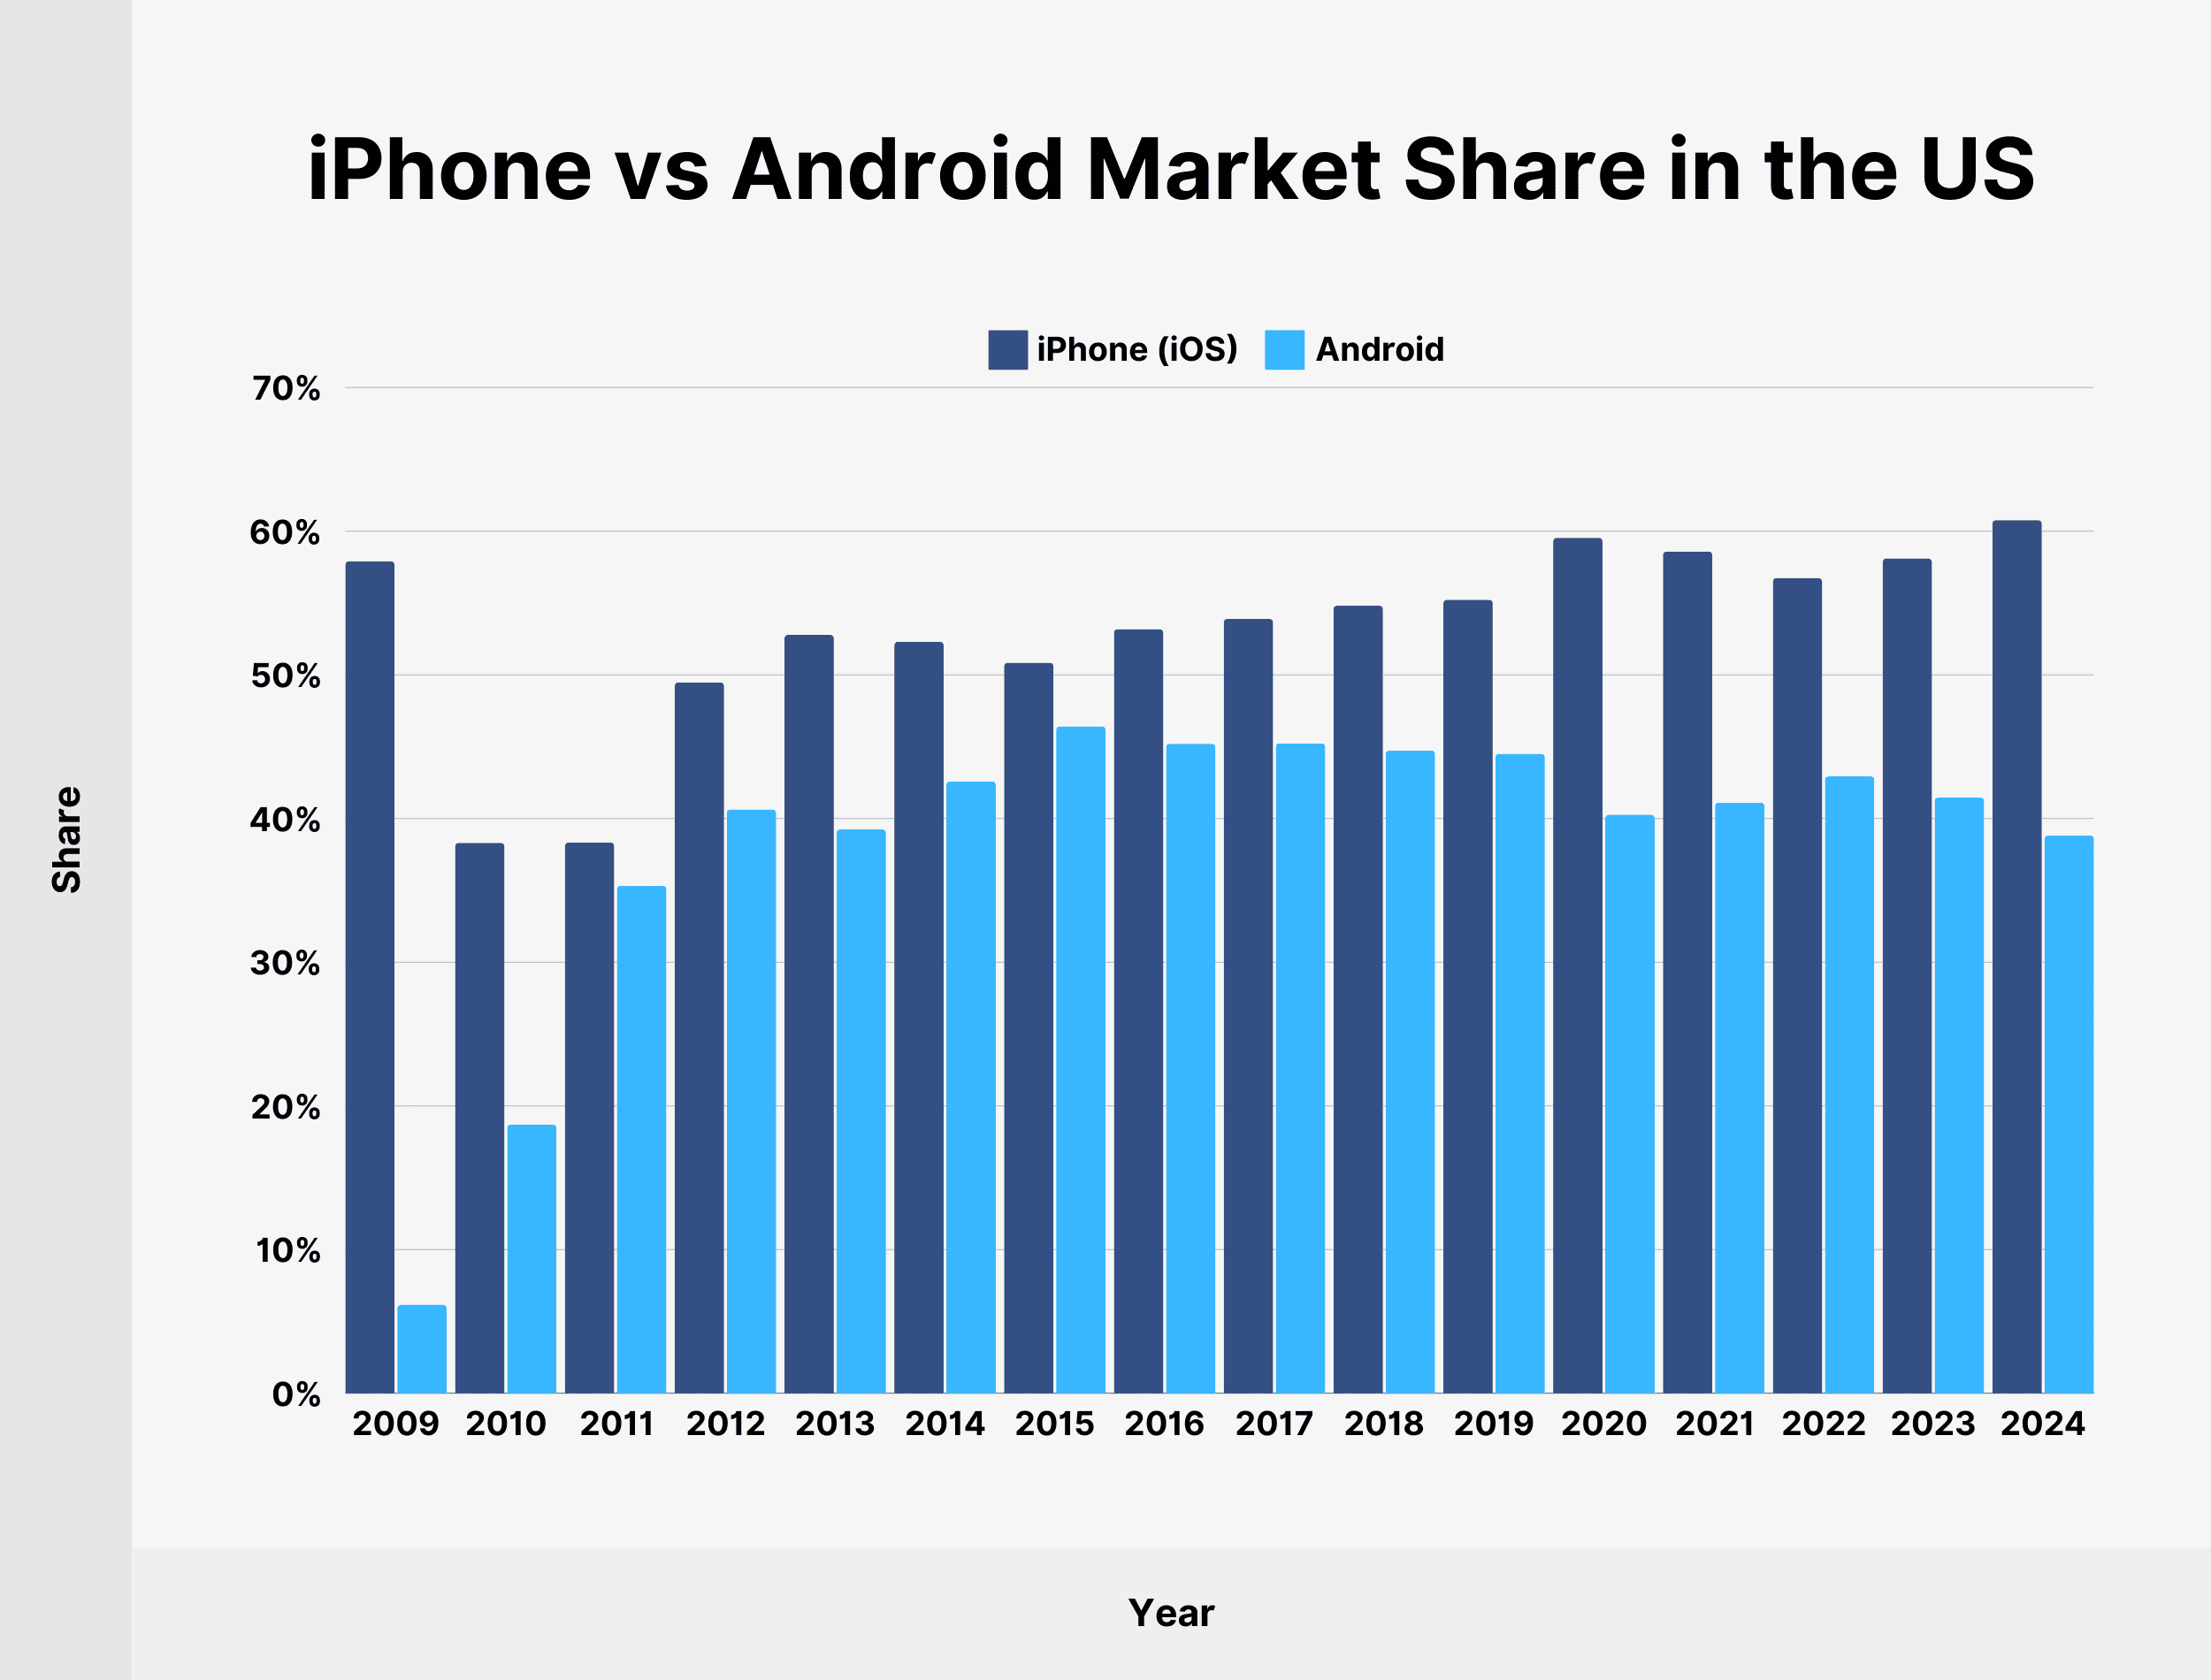 iPhone vs Android Market Share in the US